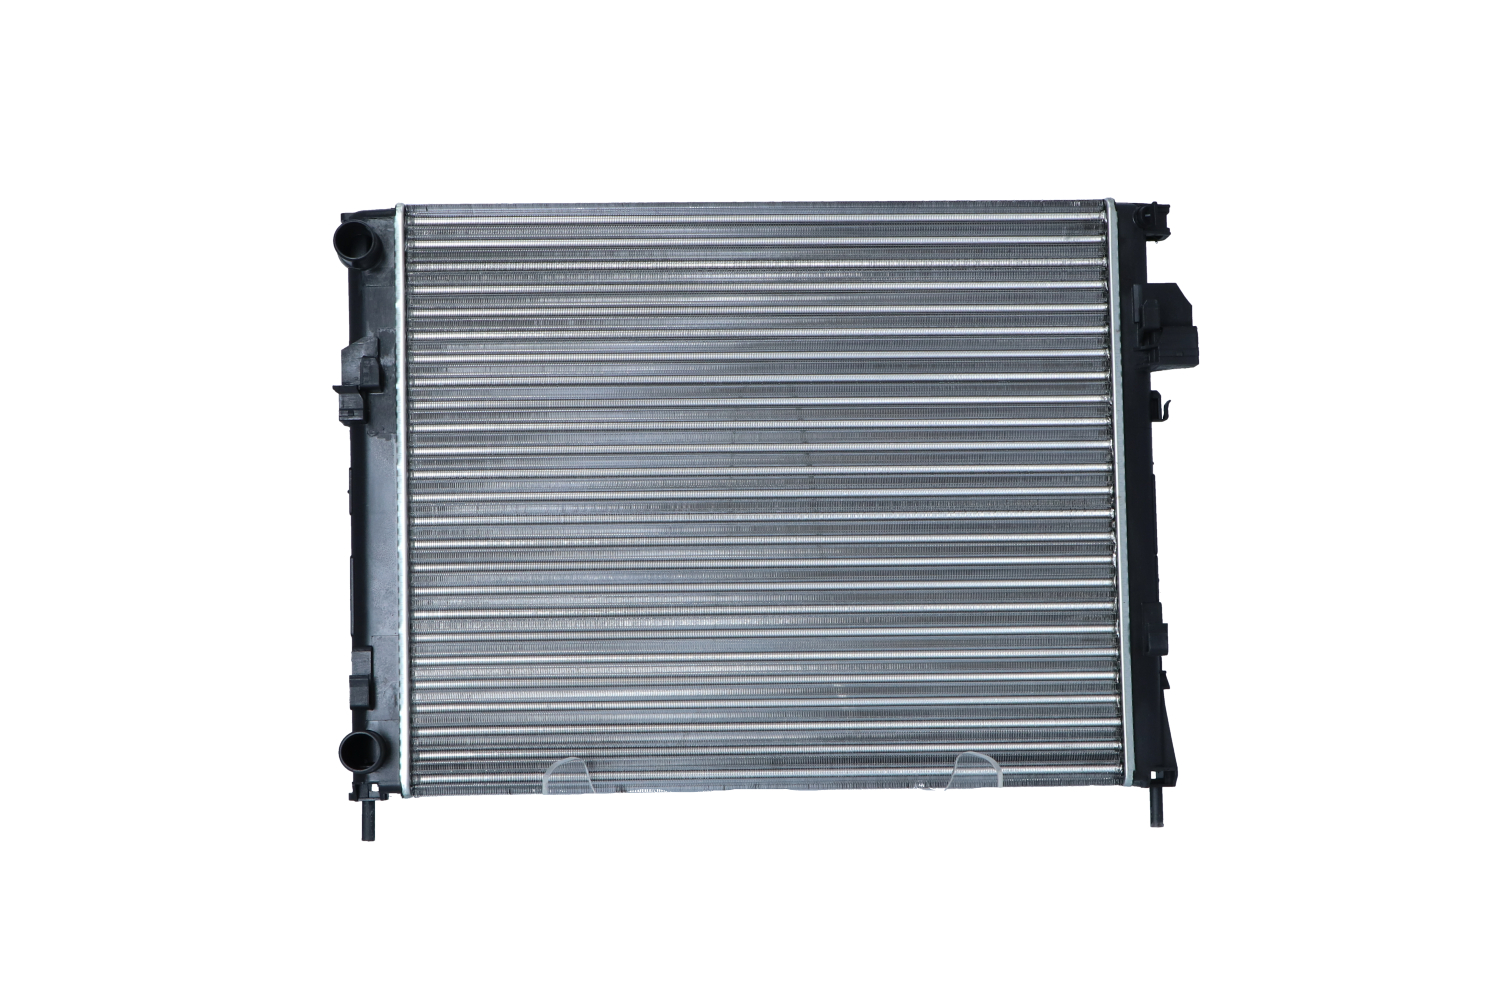 NRF 58333 Engine radiator Aluminium, 560 x 470 x 23 mm, Mechanically jointed cooling fins